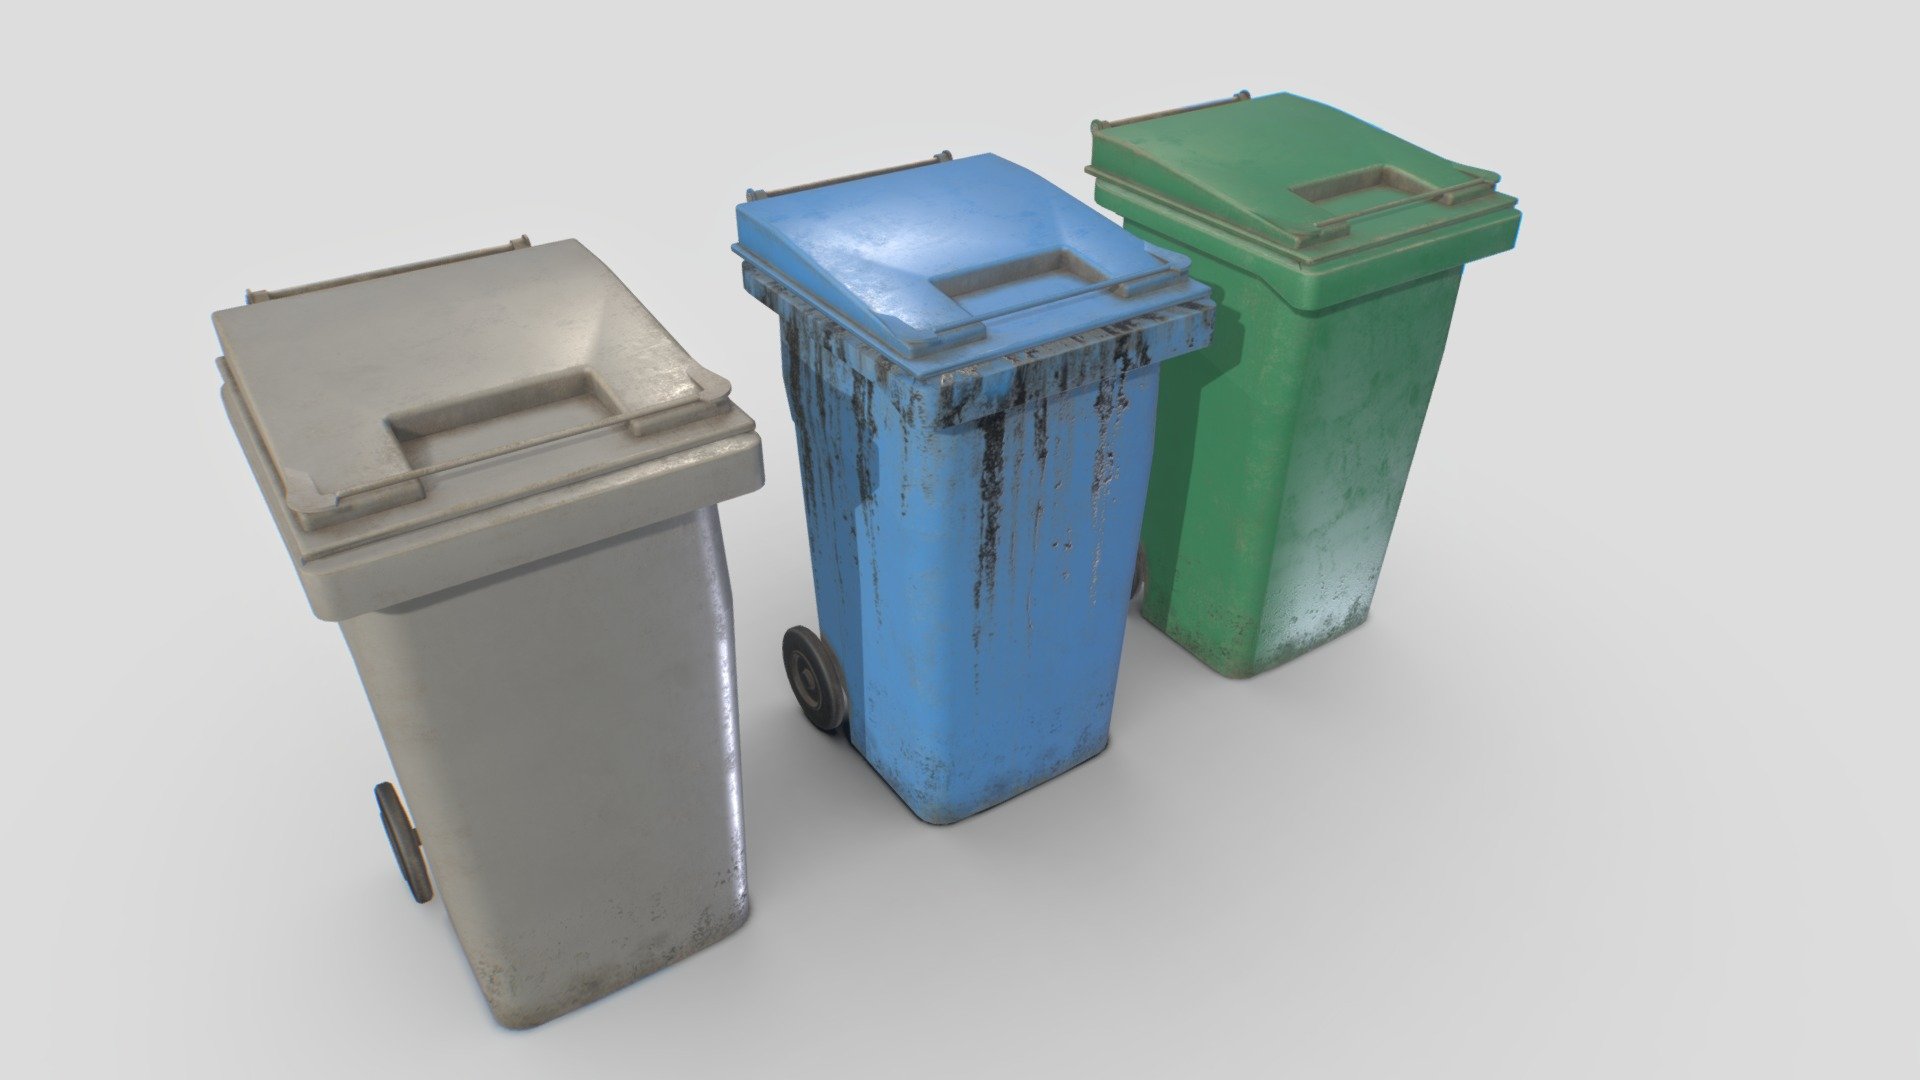 Plastic trash can. Cap can be opened. Realistic scale.

Comes with 2 texture sets, normal and leak and each one with 3 different albedo colors for a total of 6 different objects. You can also exchange the colors of the caps.

1 material.

PBR 4096x PBR textures including Albedo, Normal, Metalness, Roughness and AO. Unreal ARM mask texture included (ao, rough, metal). Also unity HDRP mask included.

3k verts and 5k tris in total 3d model